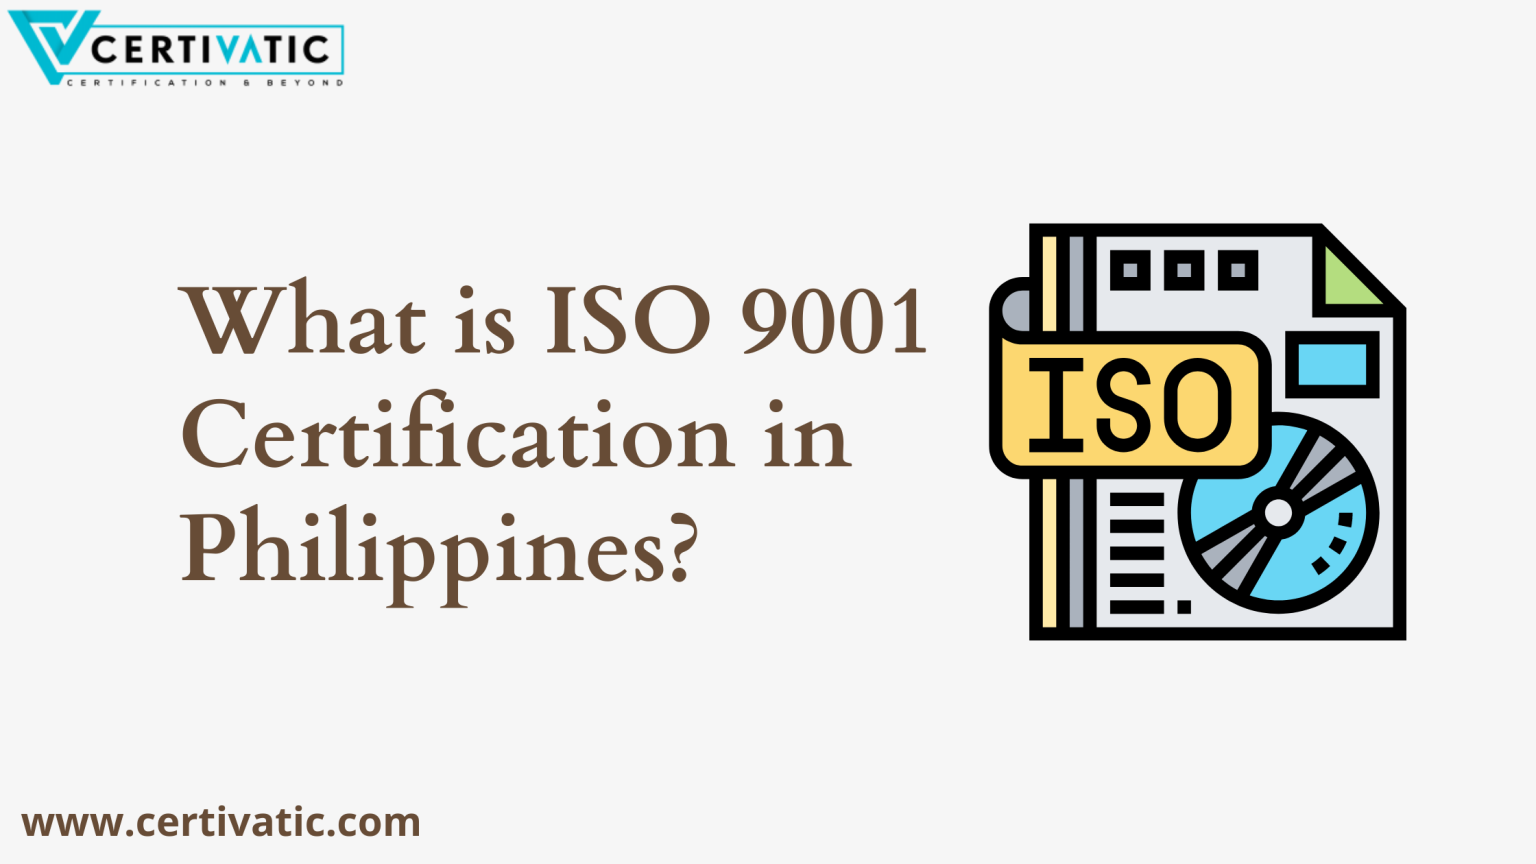 What is ISO 9001 Certification in Philippines? ISO Certification